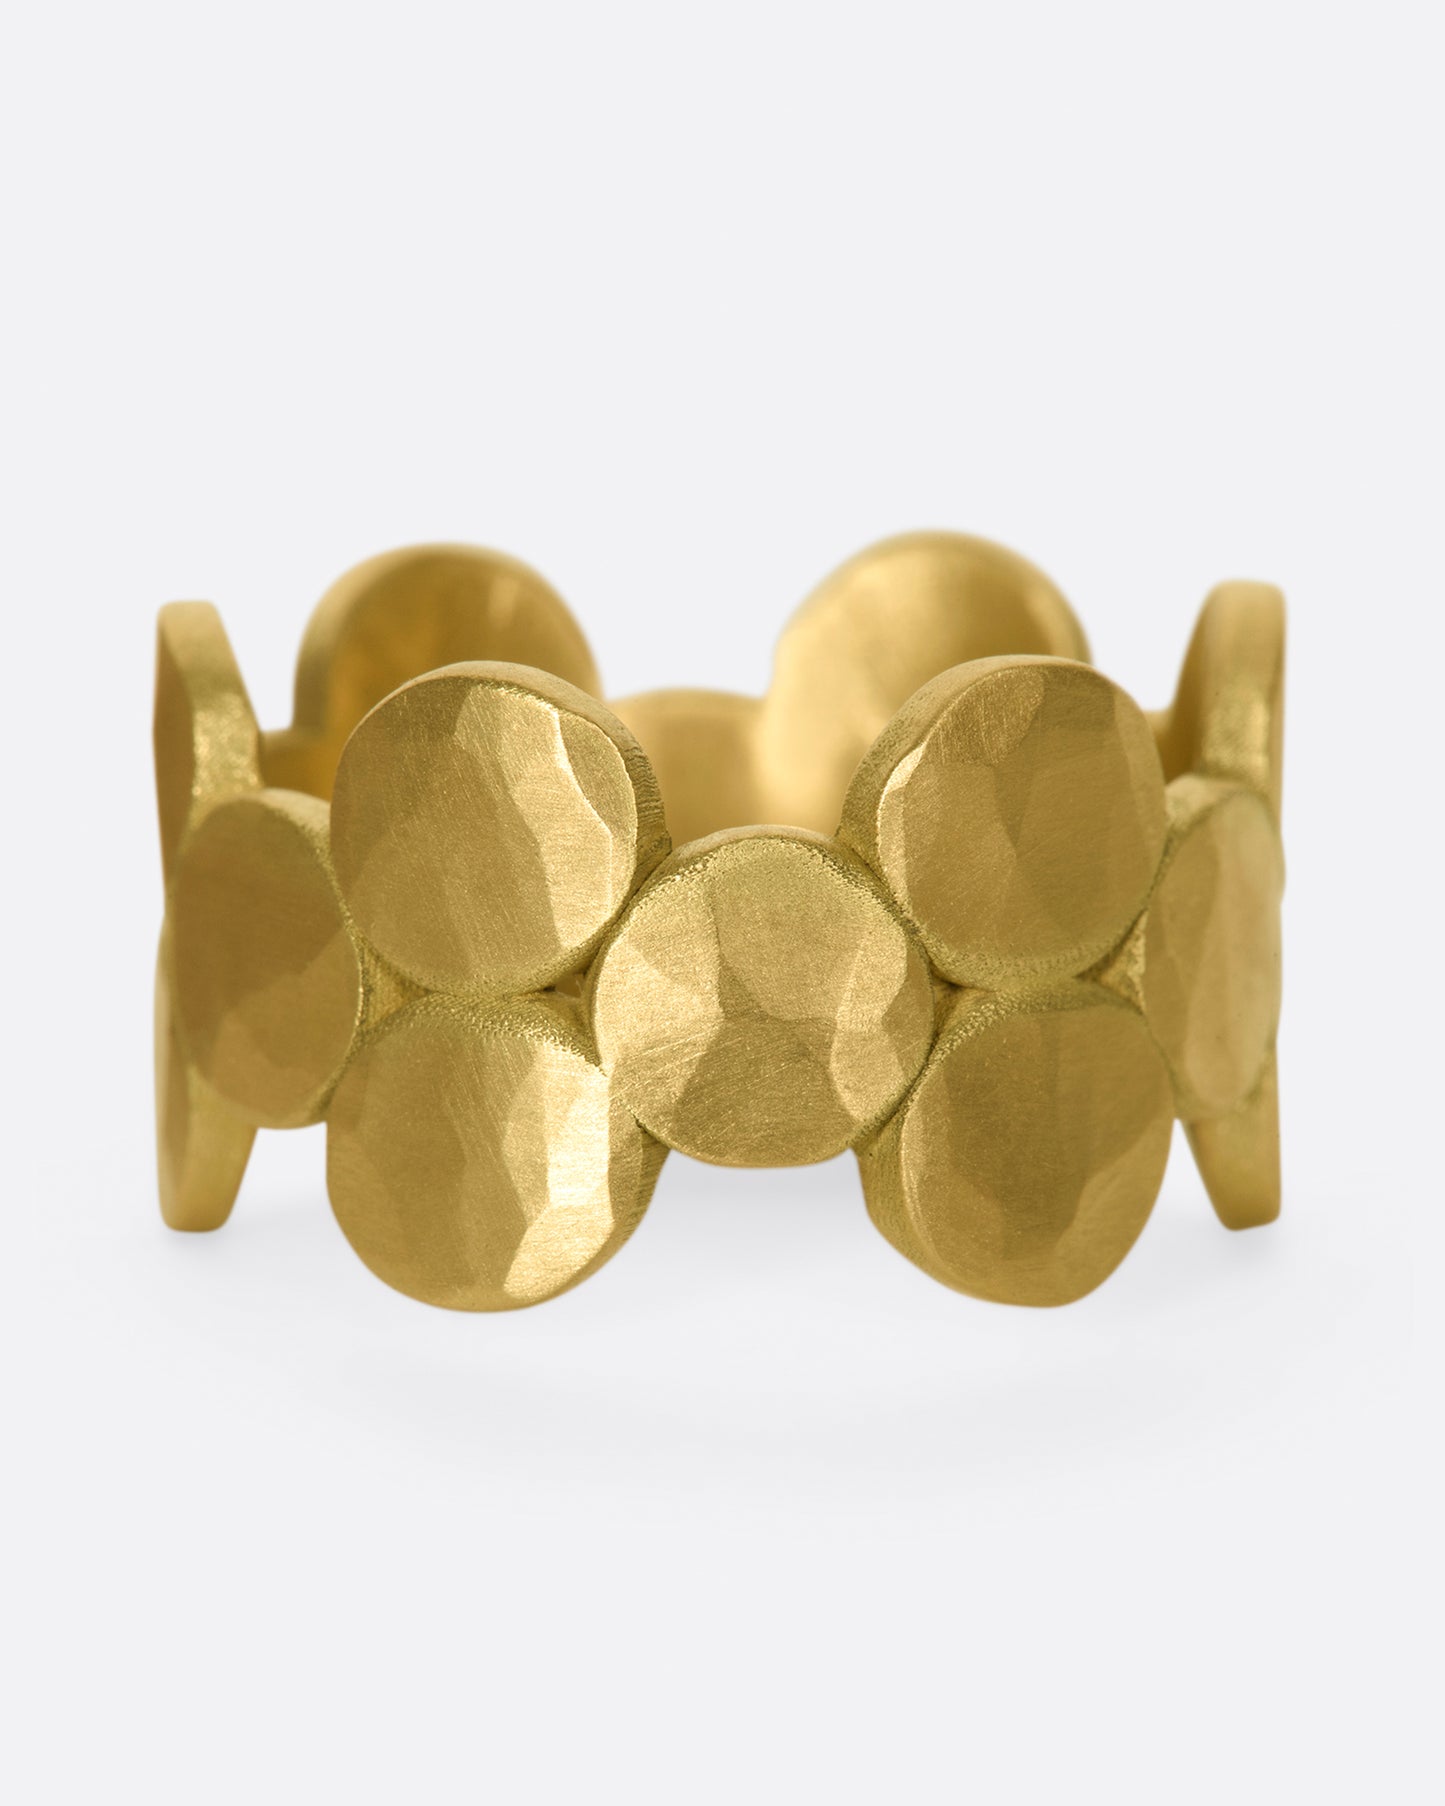 An incredible statement ring that's both comfortable and very wearable.